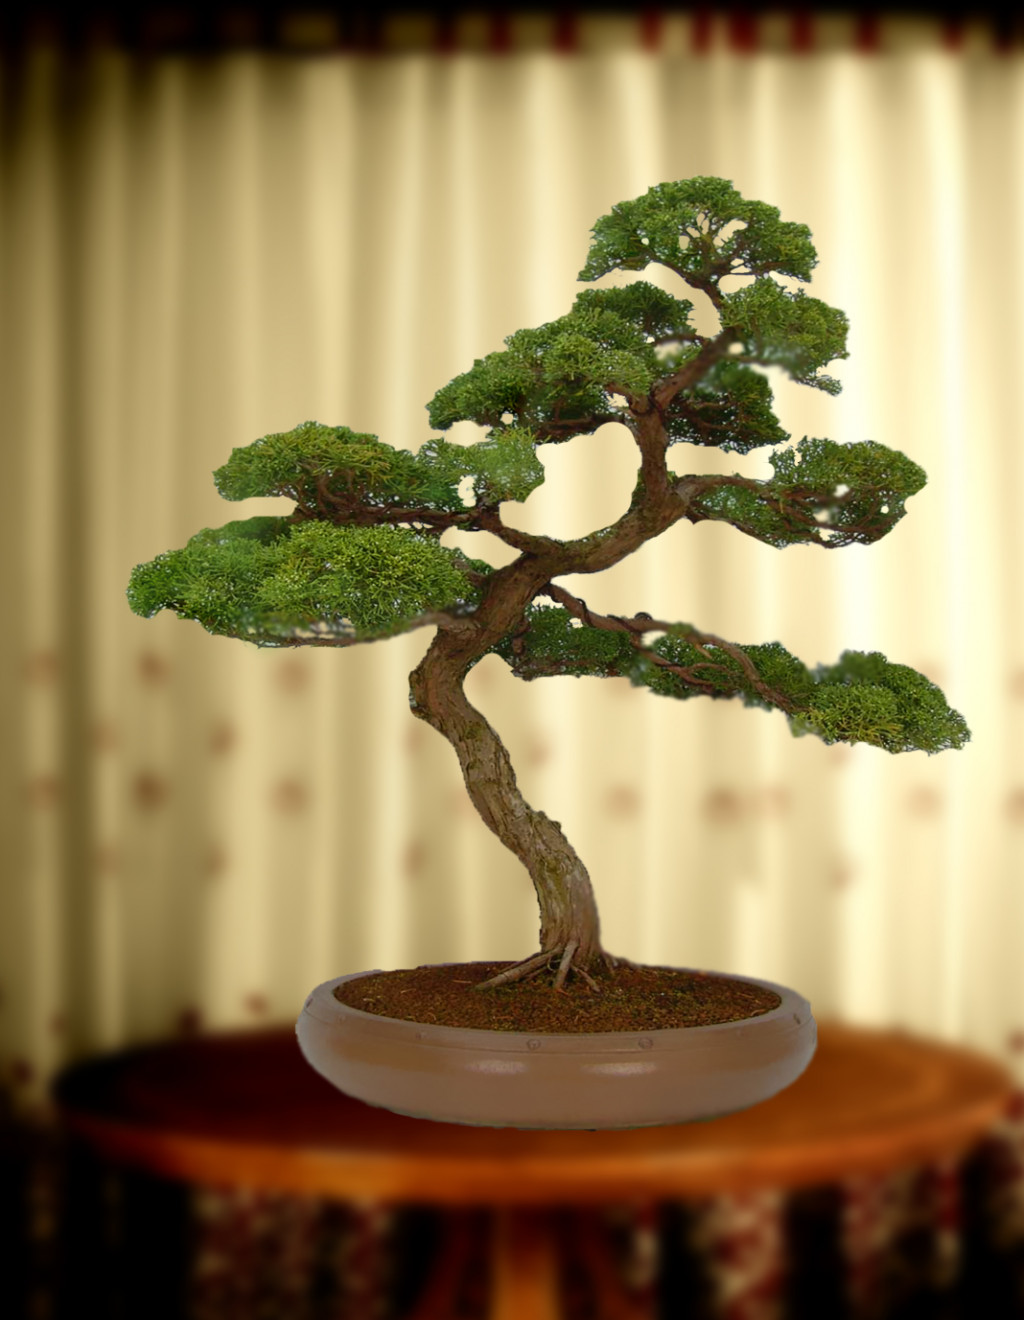 Great How To Transplant A Bonsai Tree in the world Learn more here 